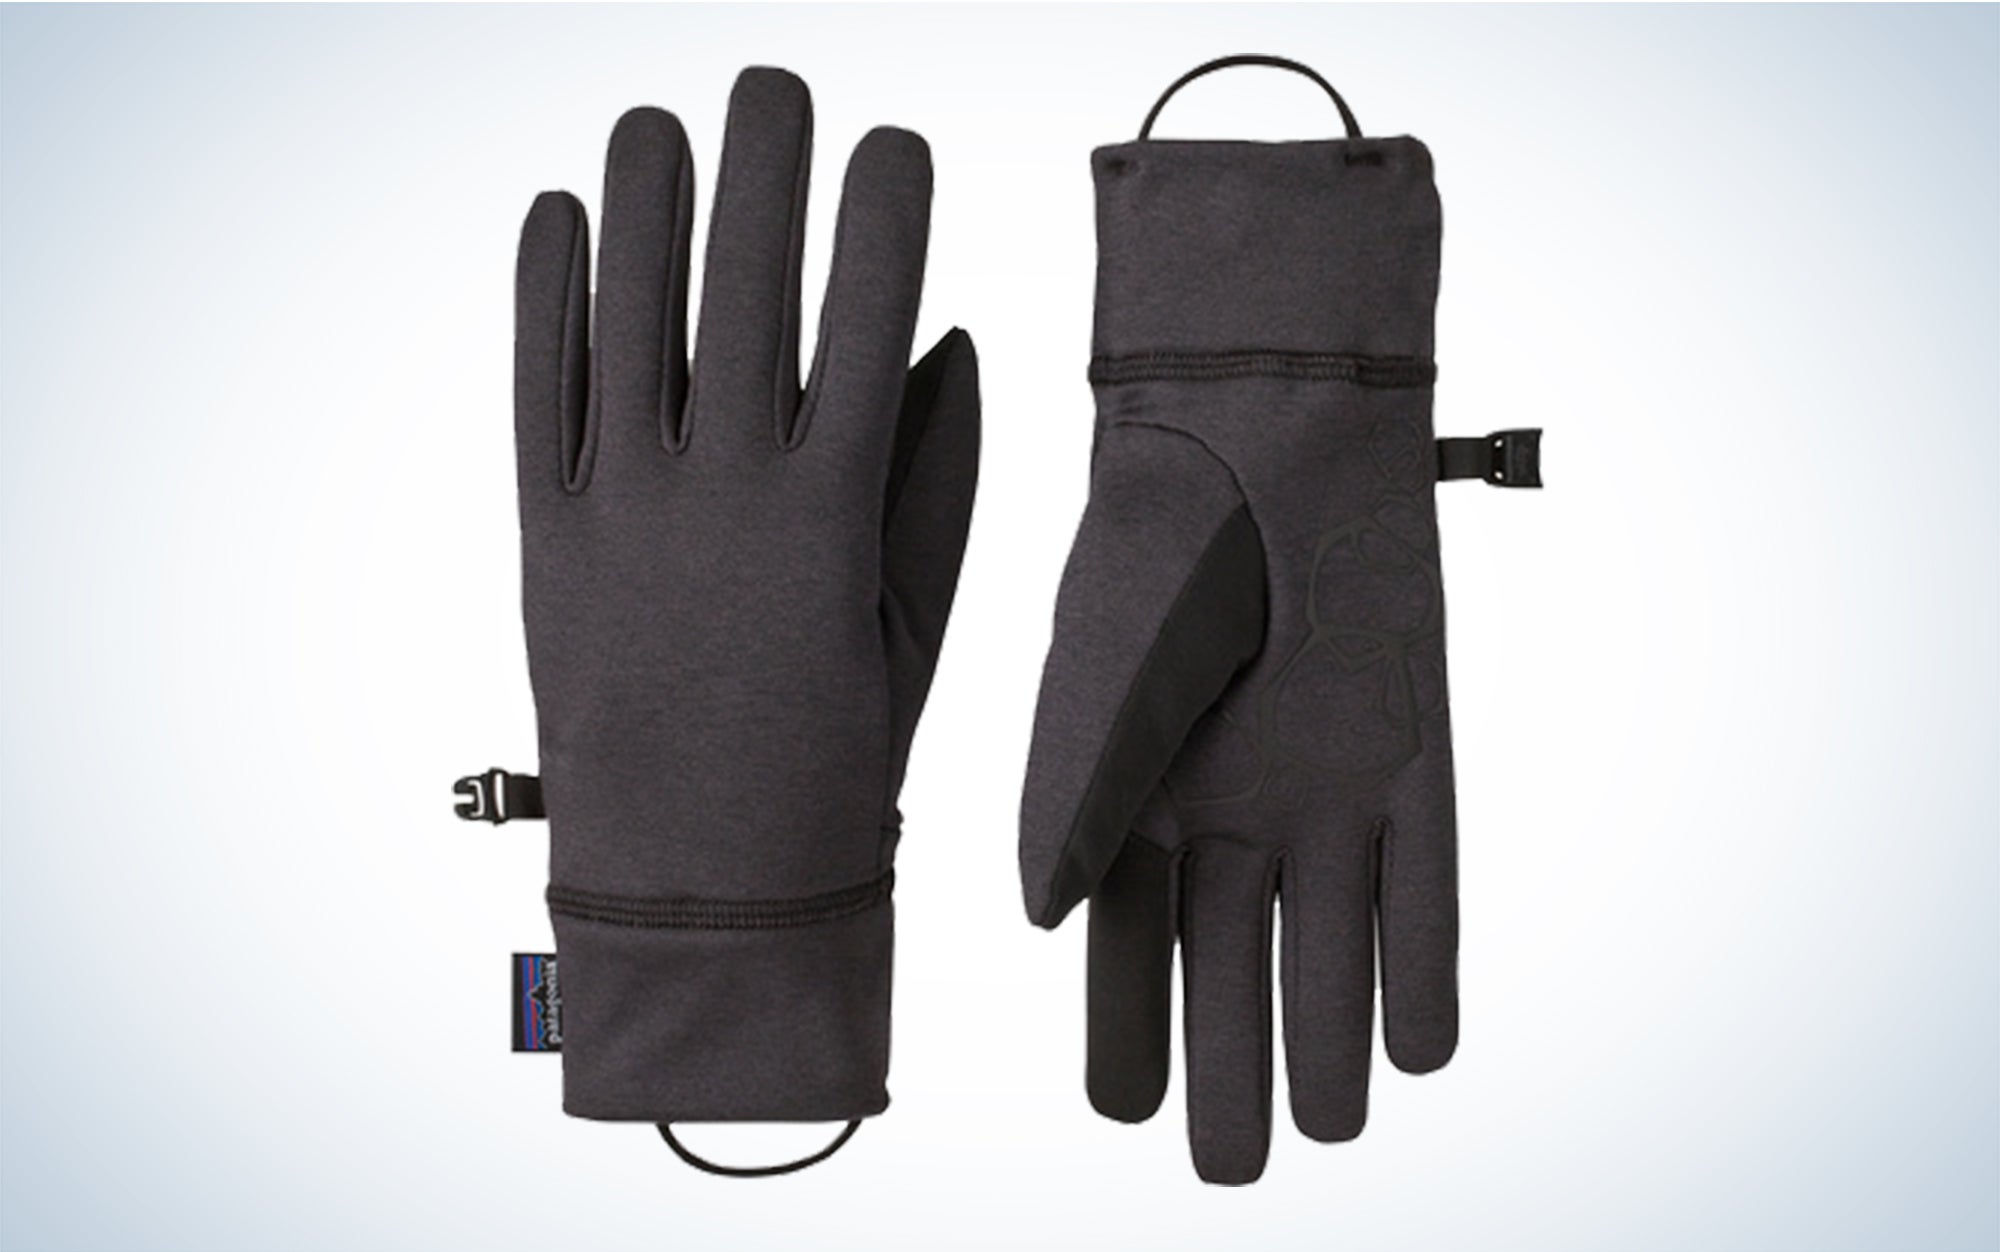 We tested the Patagonia R1 Daily Gloves.